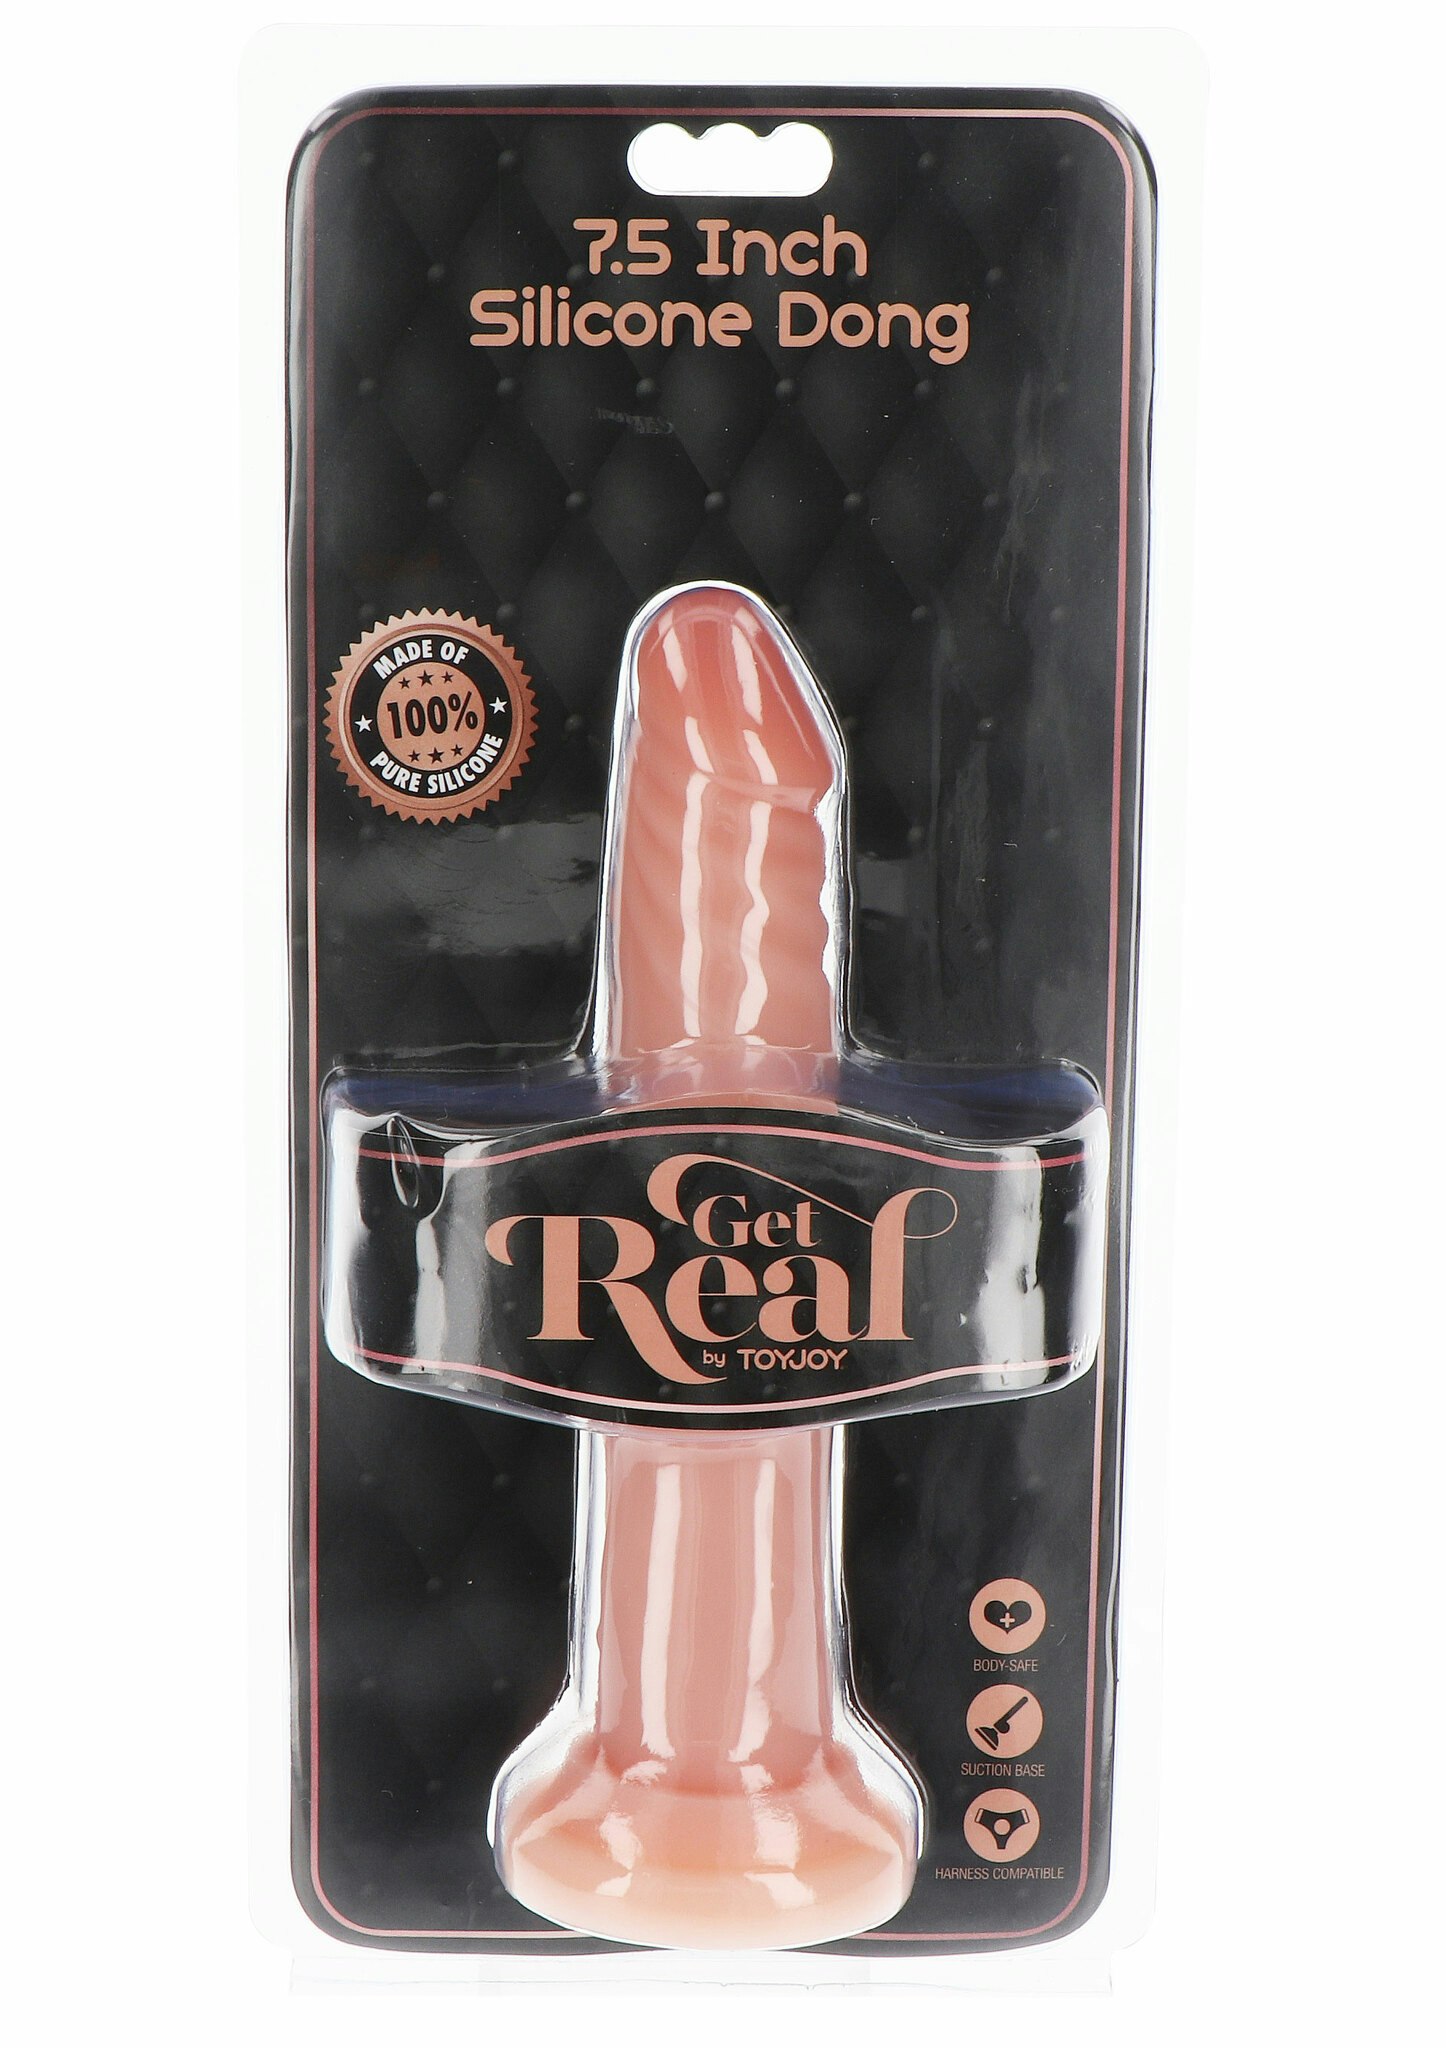 Get Real - Silicone Dong 7.5 Inch